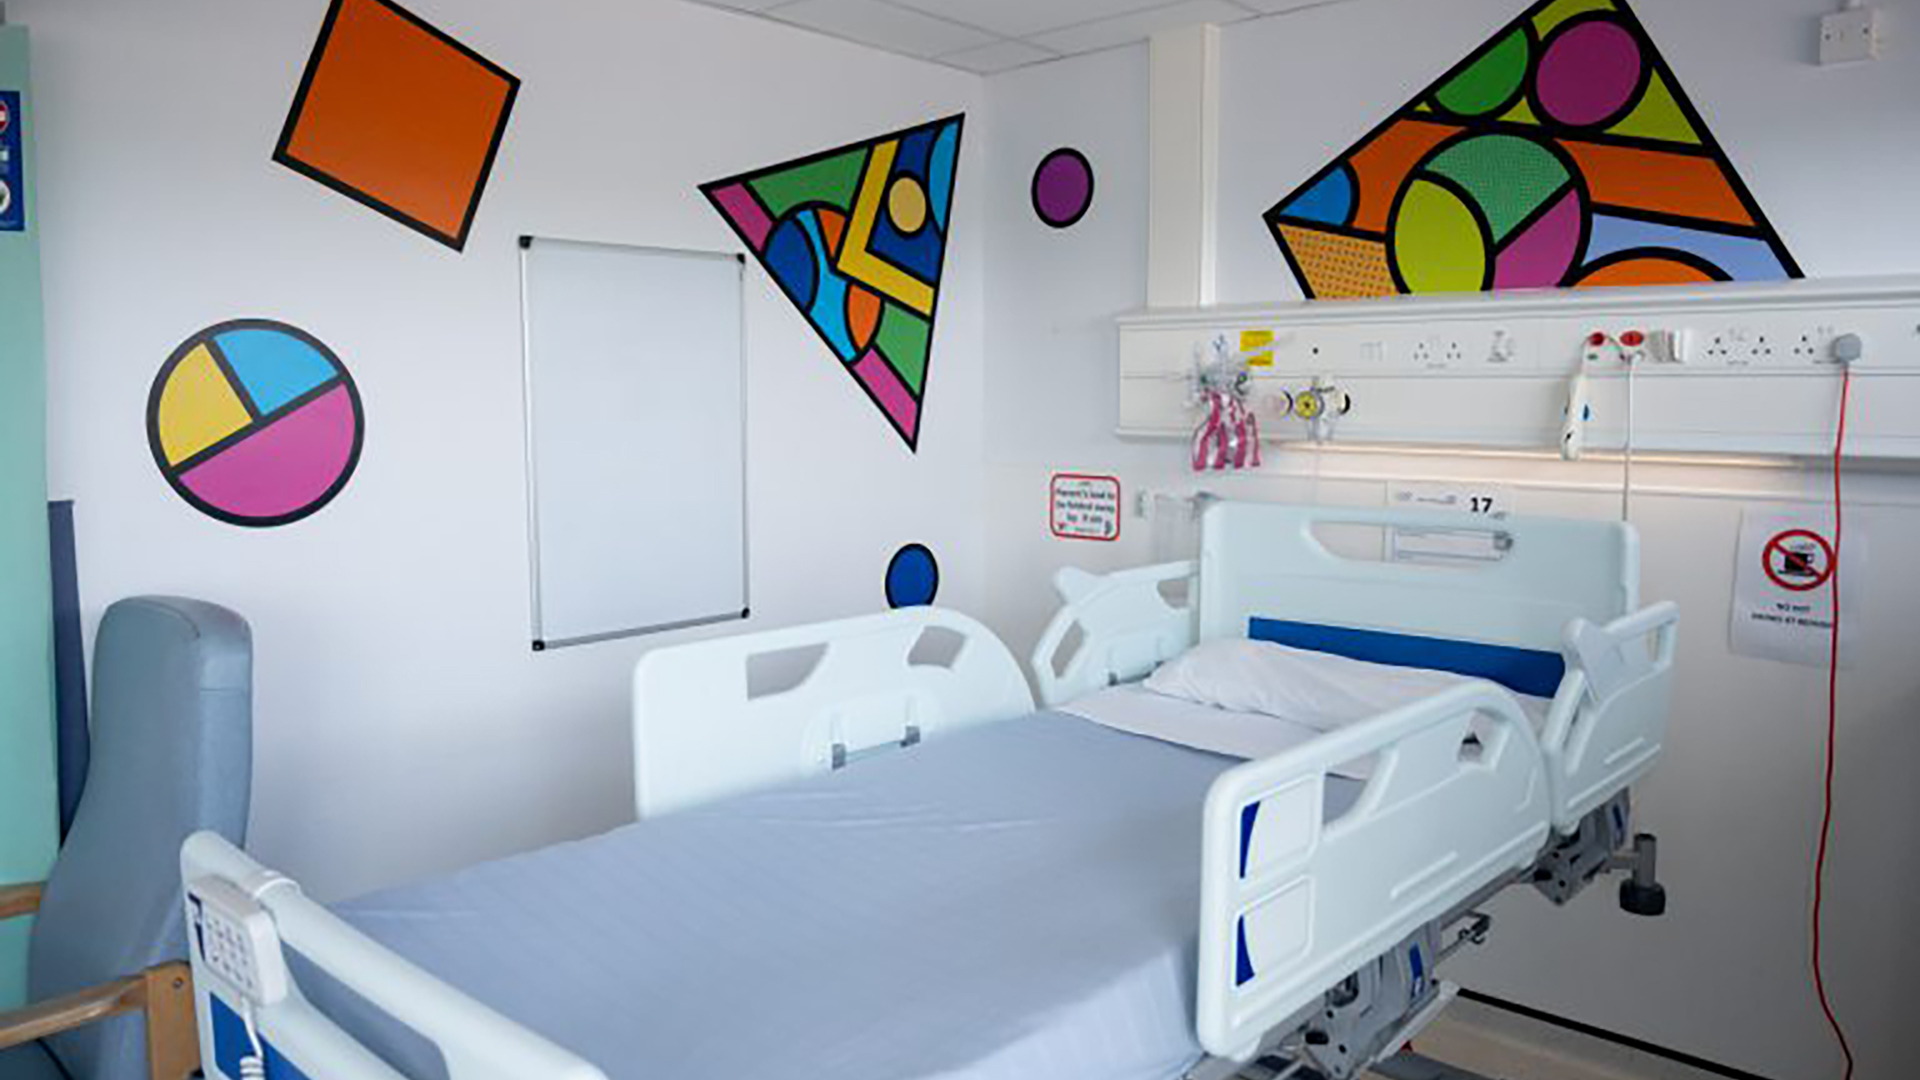 A hospital room decorated with wall art designed by the artist Supermundane